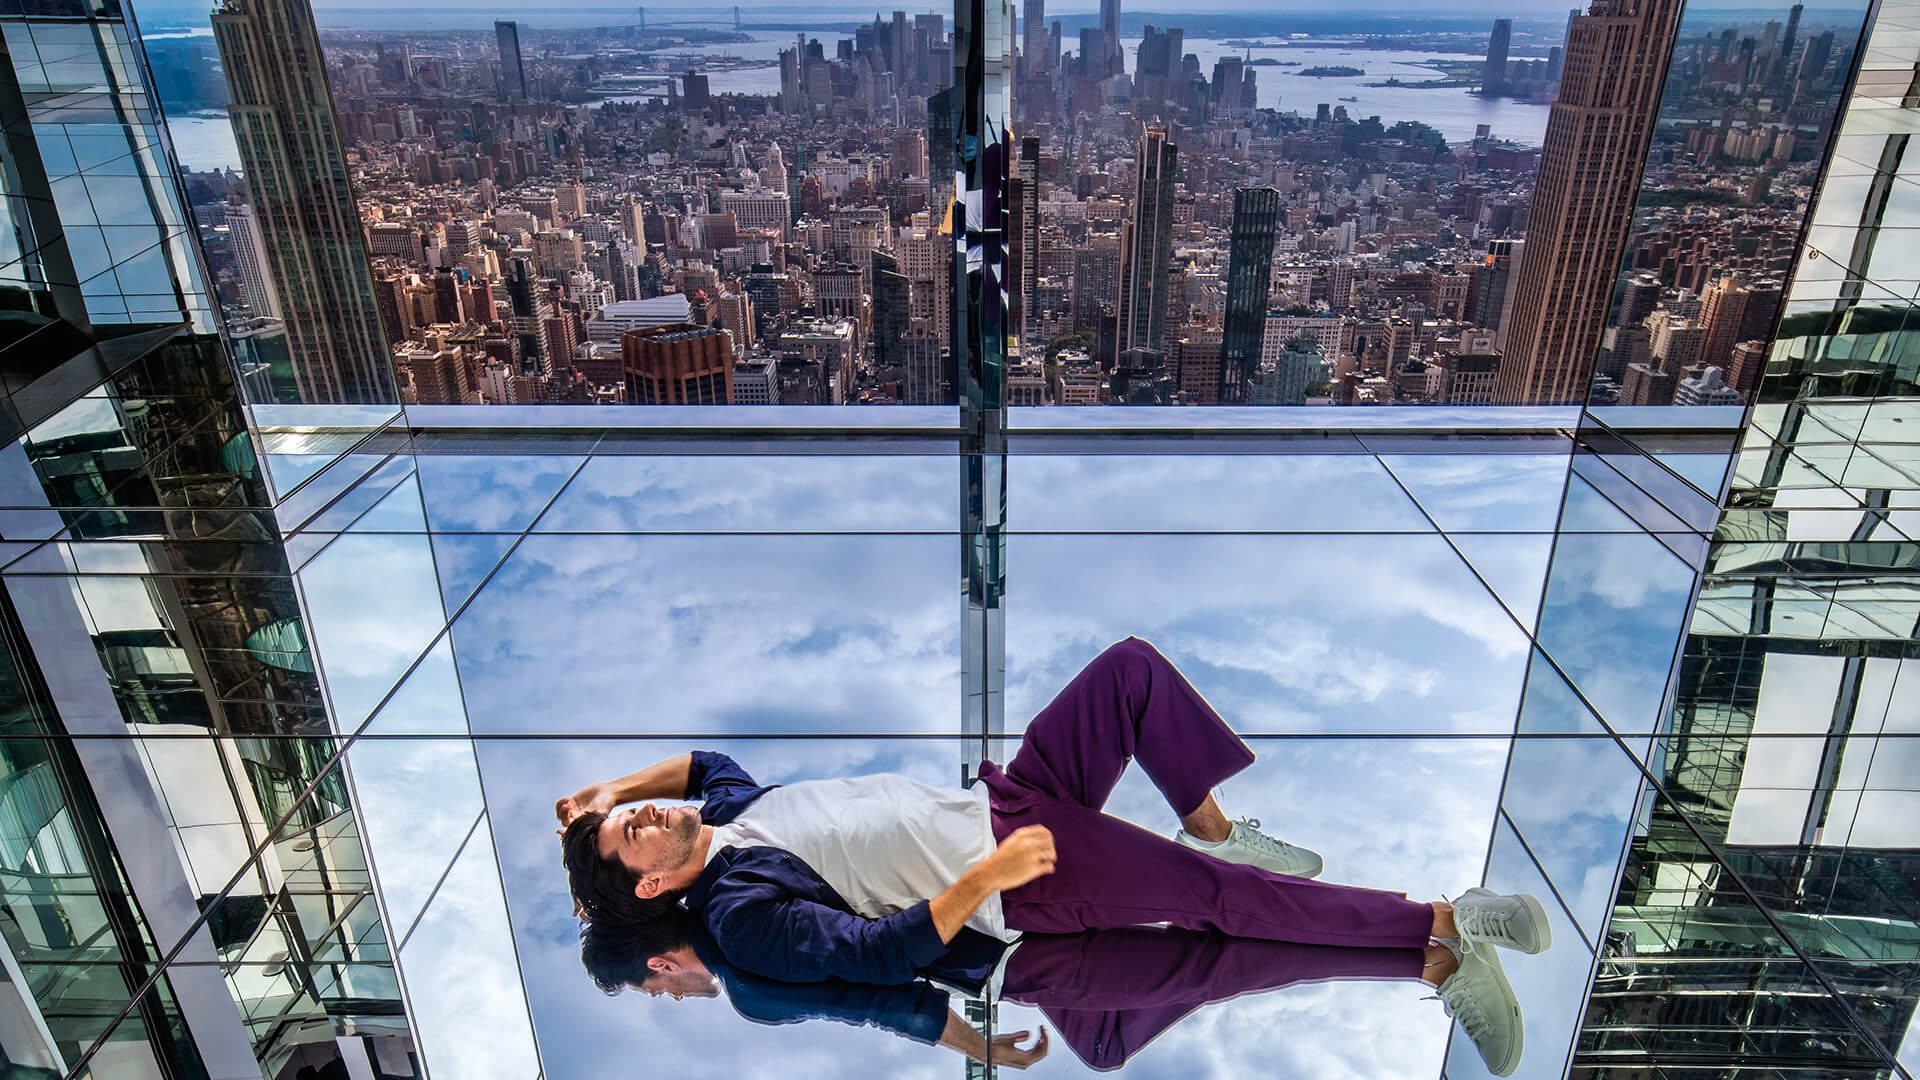 A man lounging on a transparent glass floor with the New York skyline reflecting in mirrored panels around him.